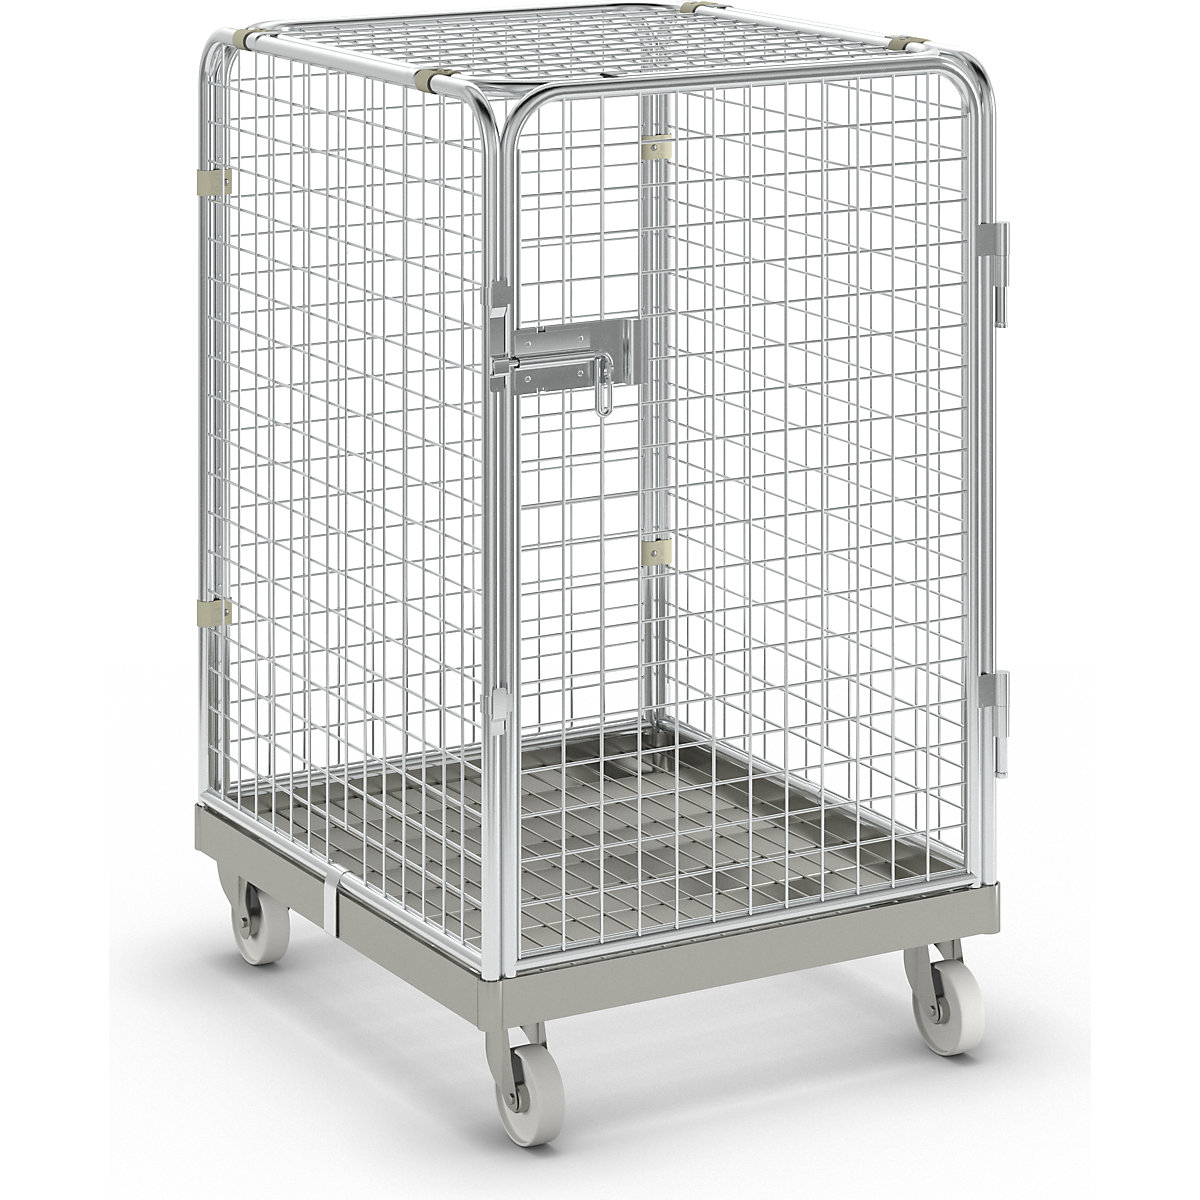 Security steel container with steel dolly